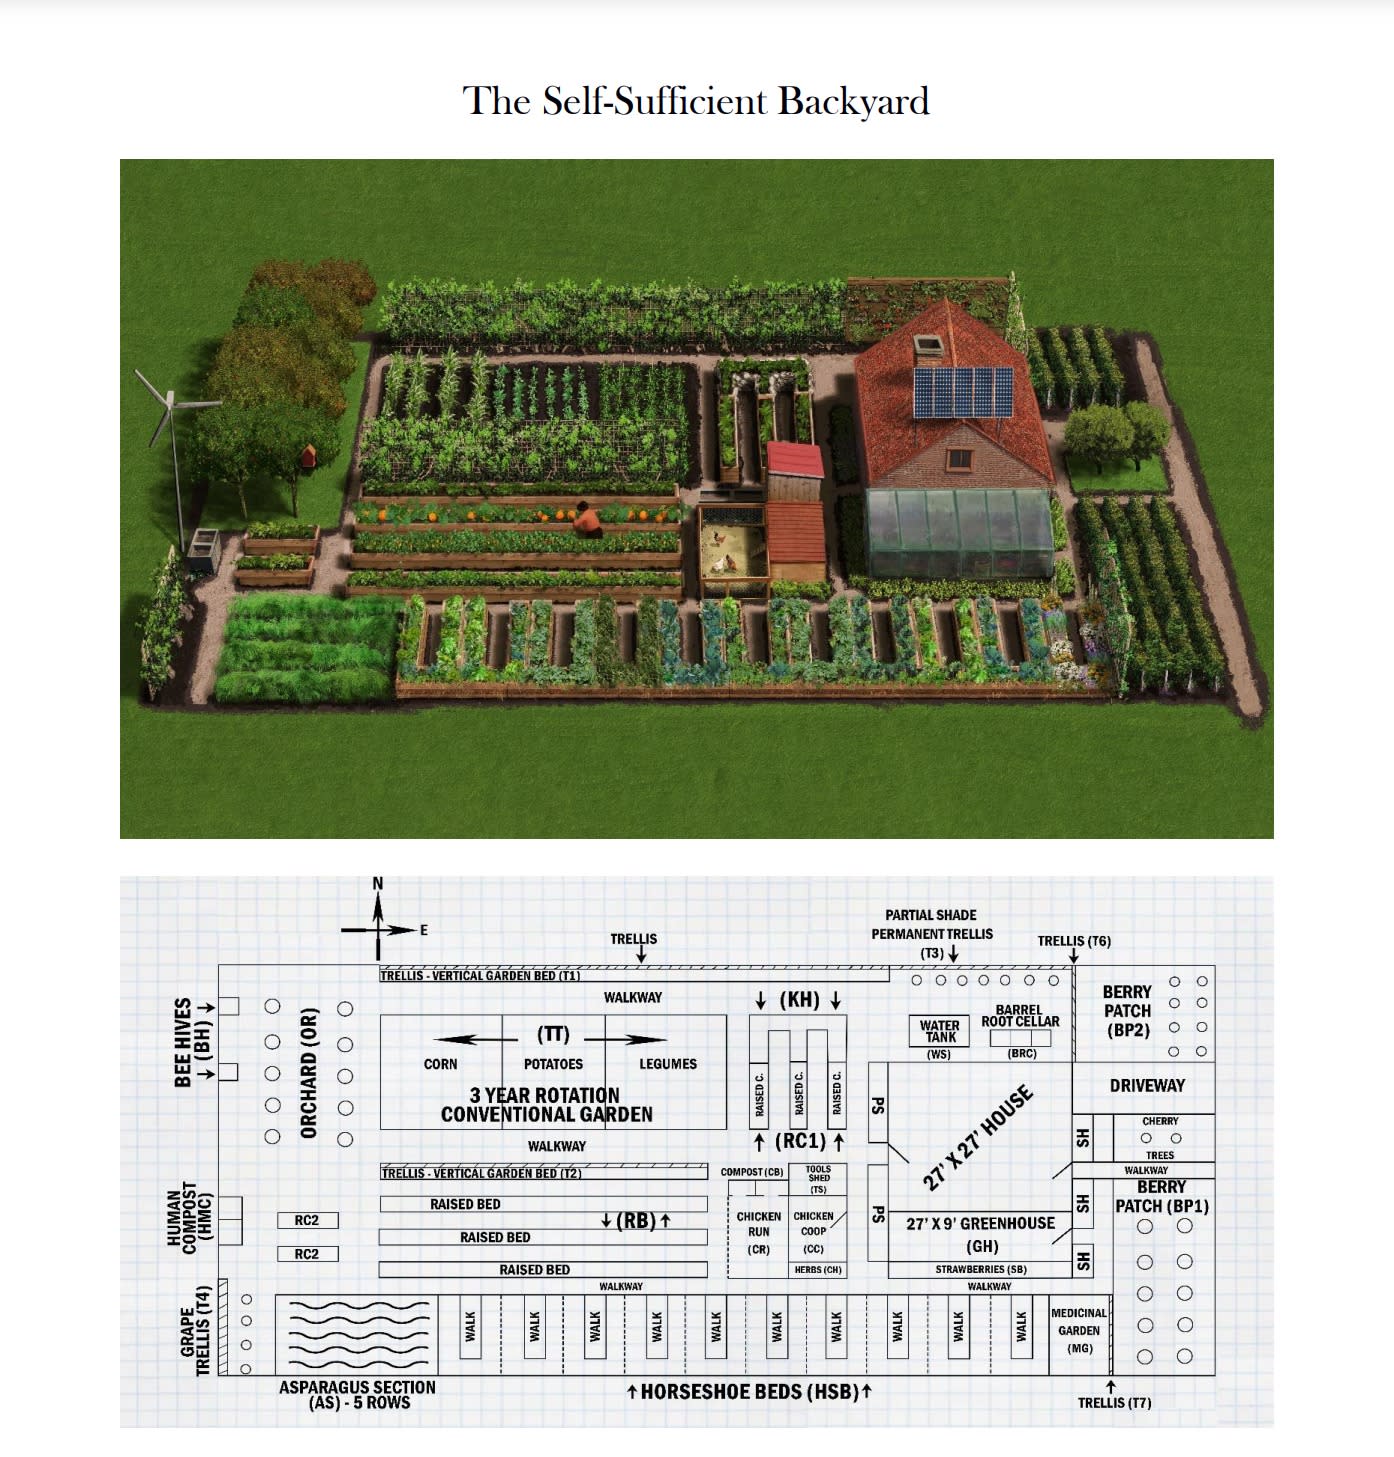 Blueprint for how to be self sufficient in a 1/4 acre backyard.